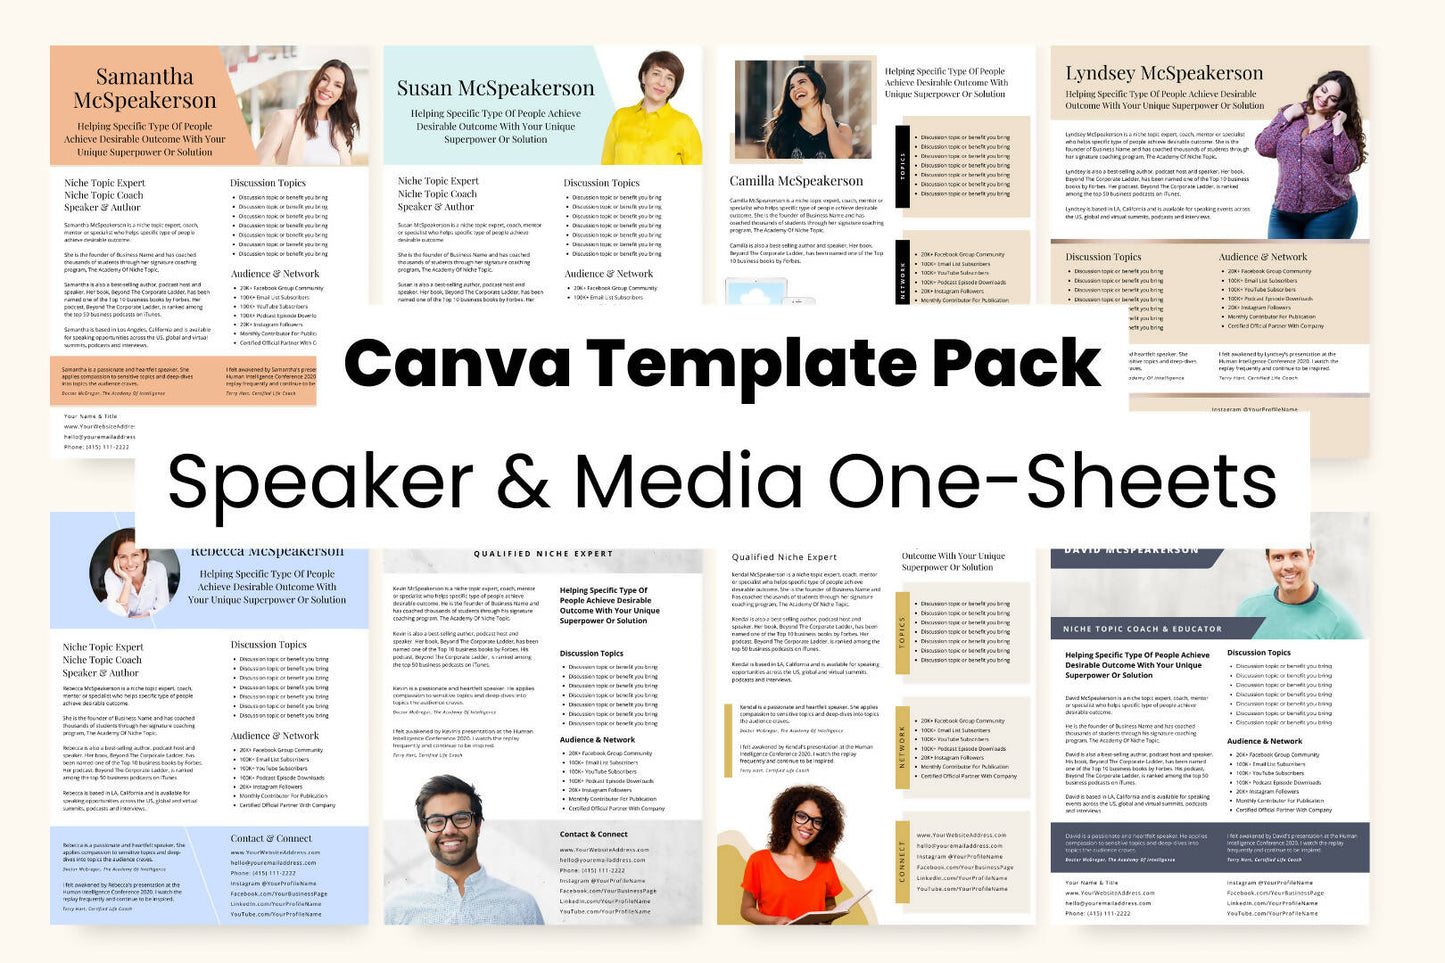 Speaker & Media Profile One-Sheets Canva Template Pack